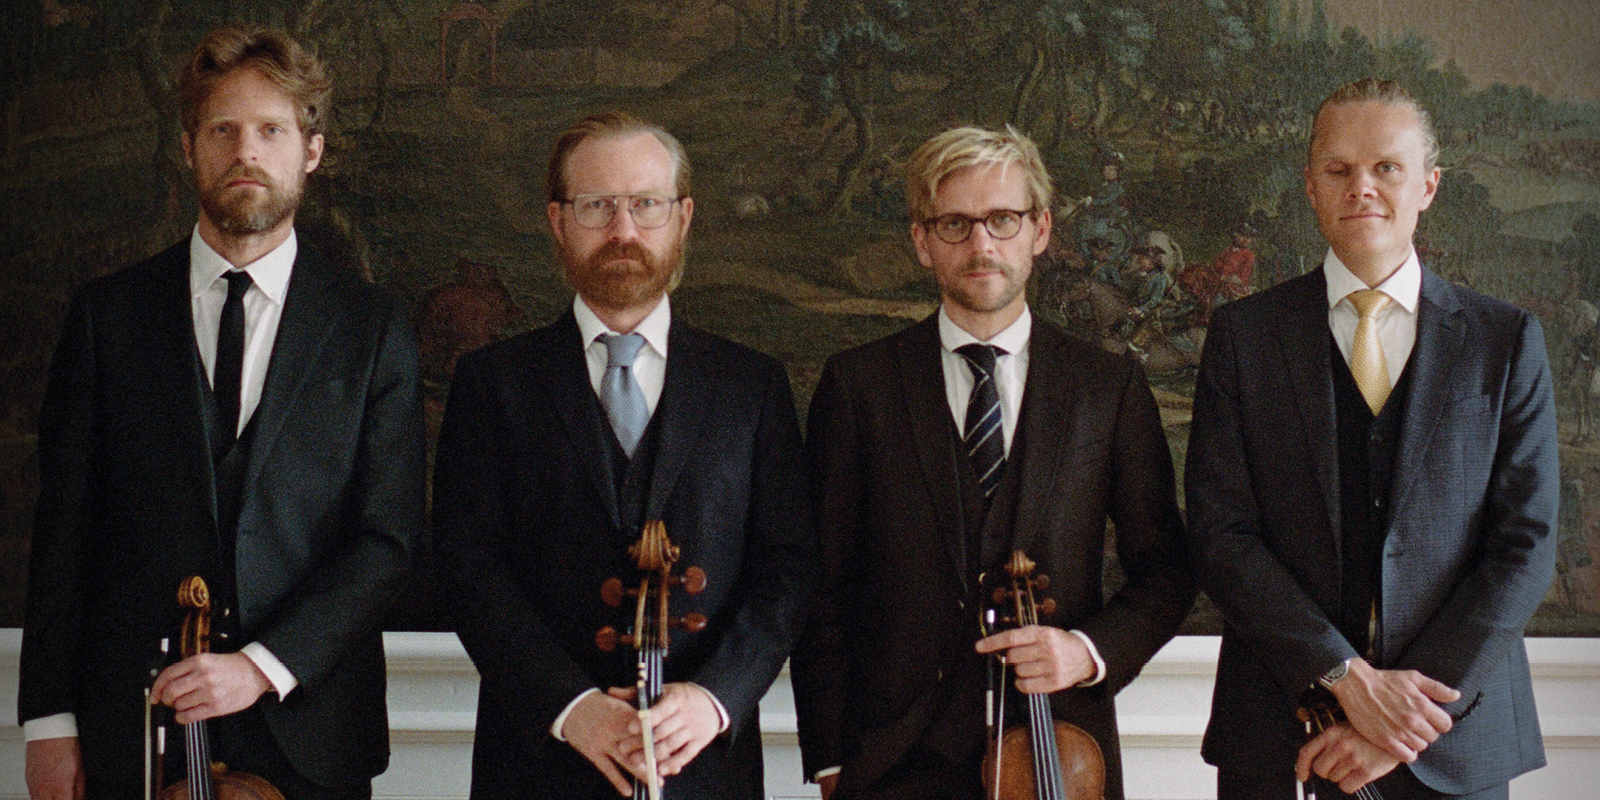 Four men in dark suits stand shoulder to should holding string instruments in front of a large mural.